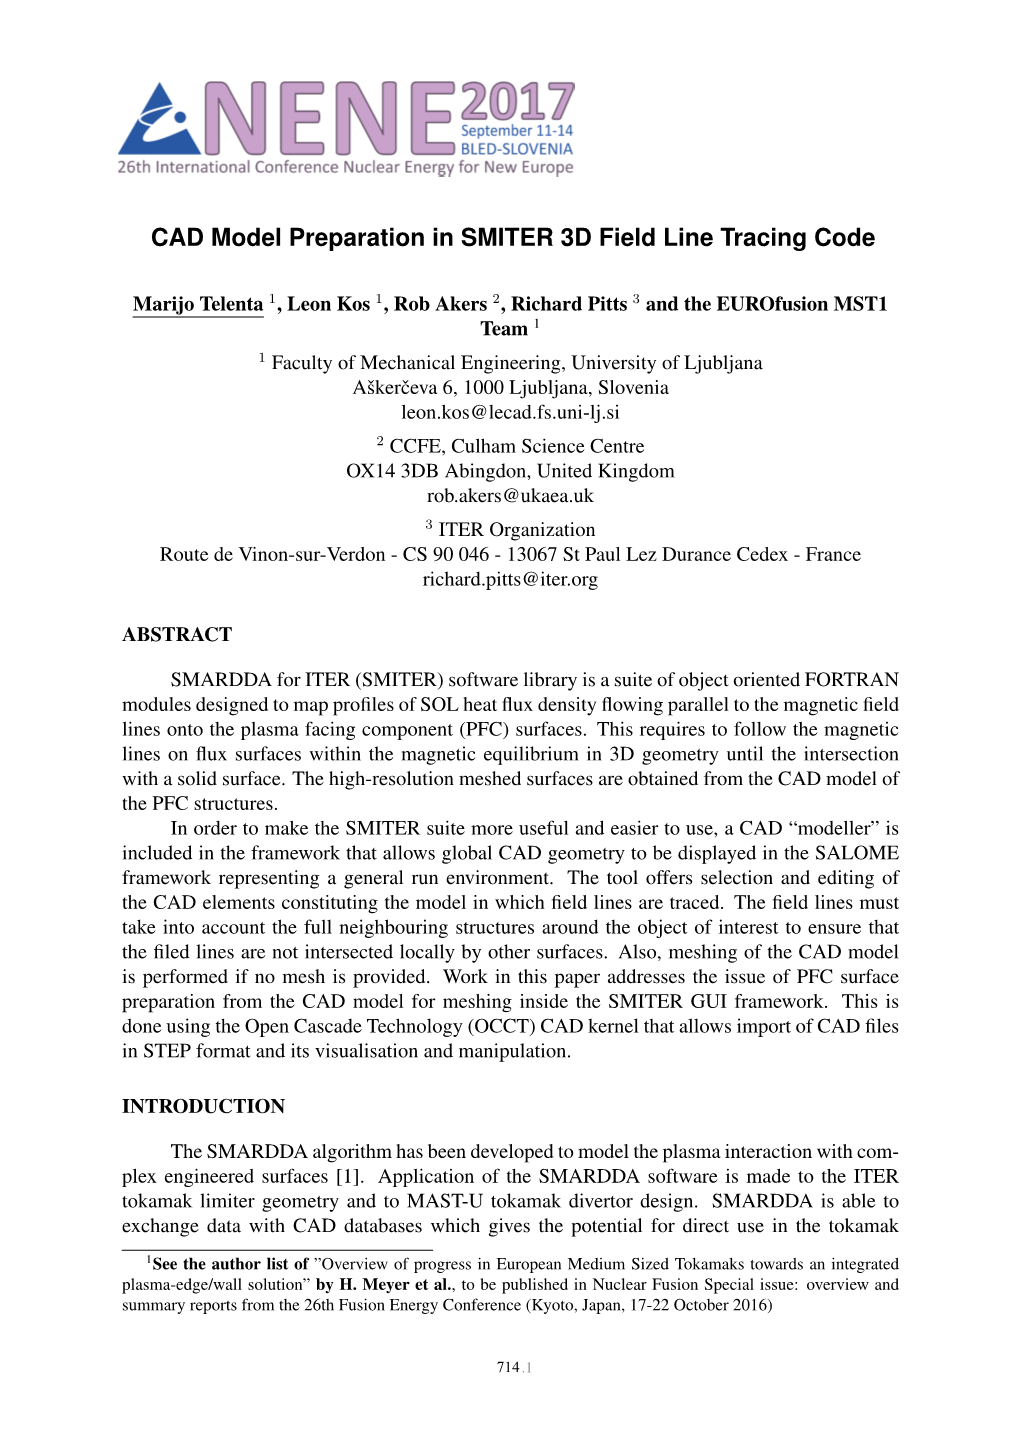 CAD Model Preparation in SMITER 3D Field Line Tracing Code